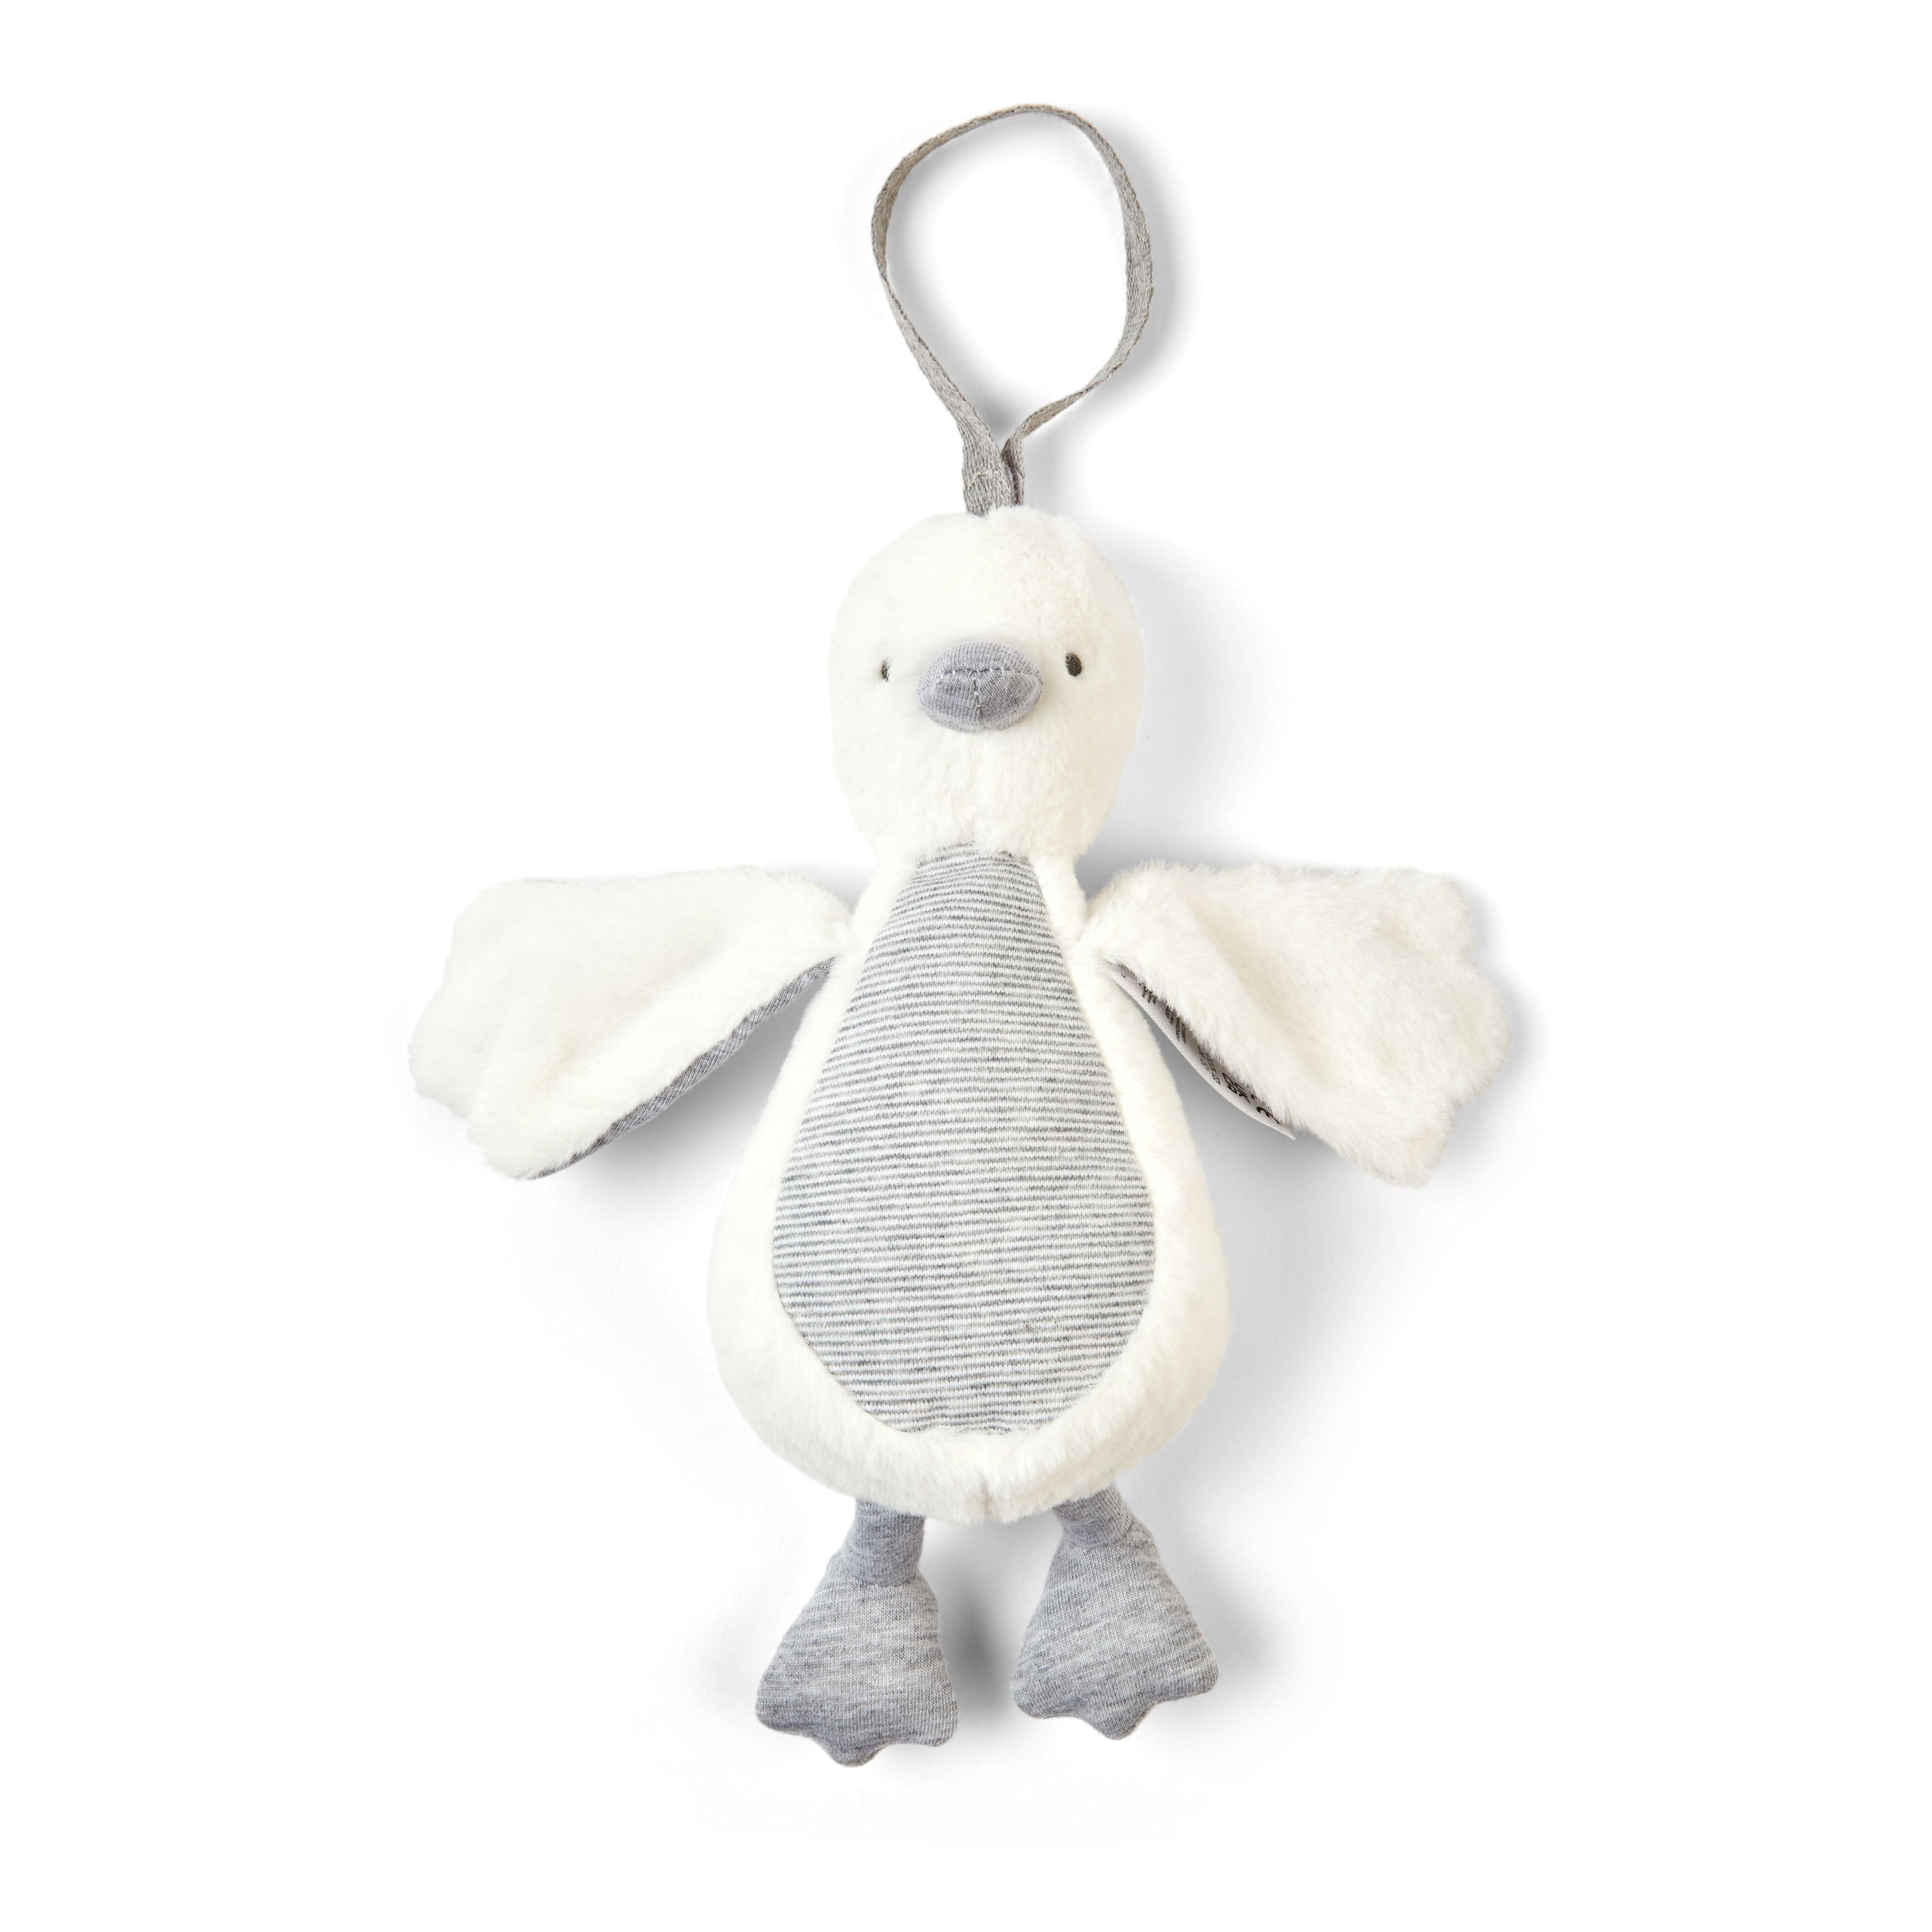 Mamas & Papas soft animals Mamas & Papas Soft Travel Toy Welcome to the World - Grey Chime Duck 7609HG401